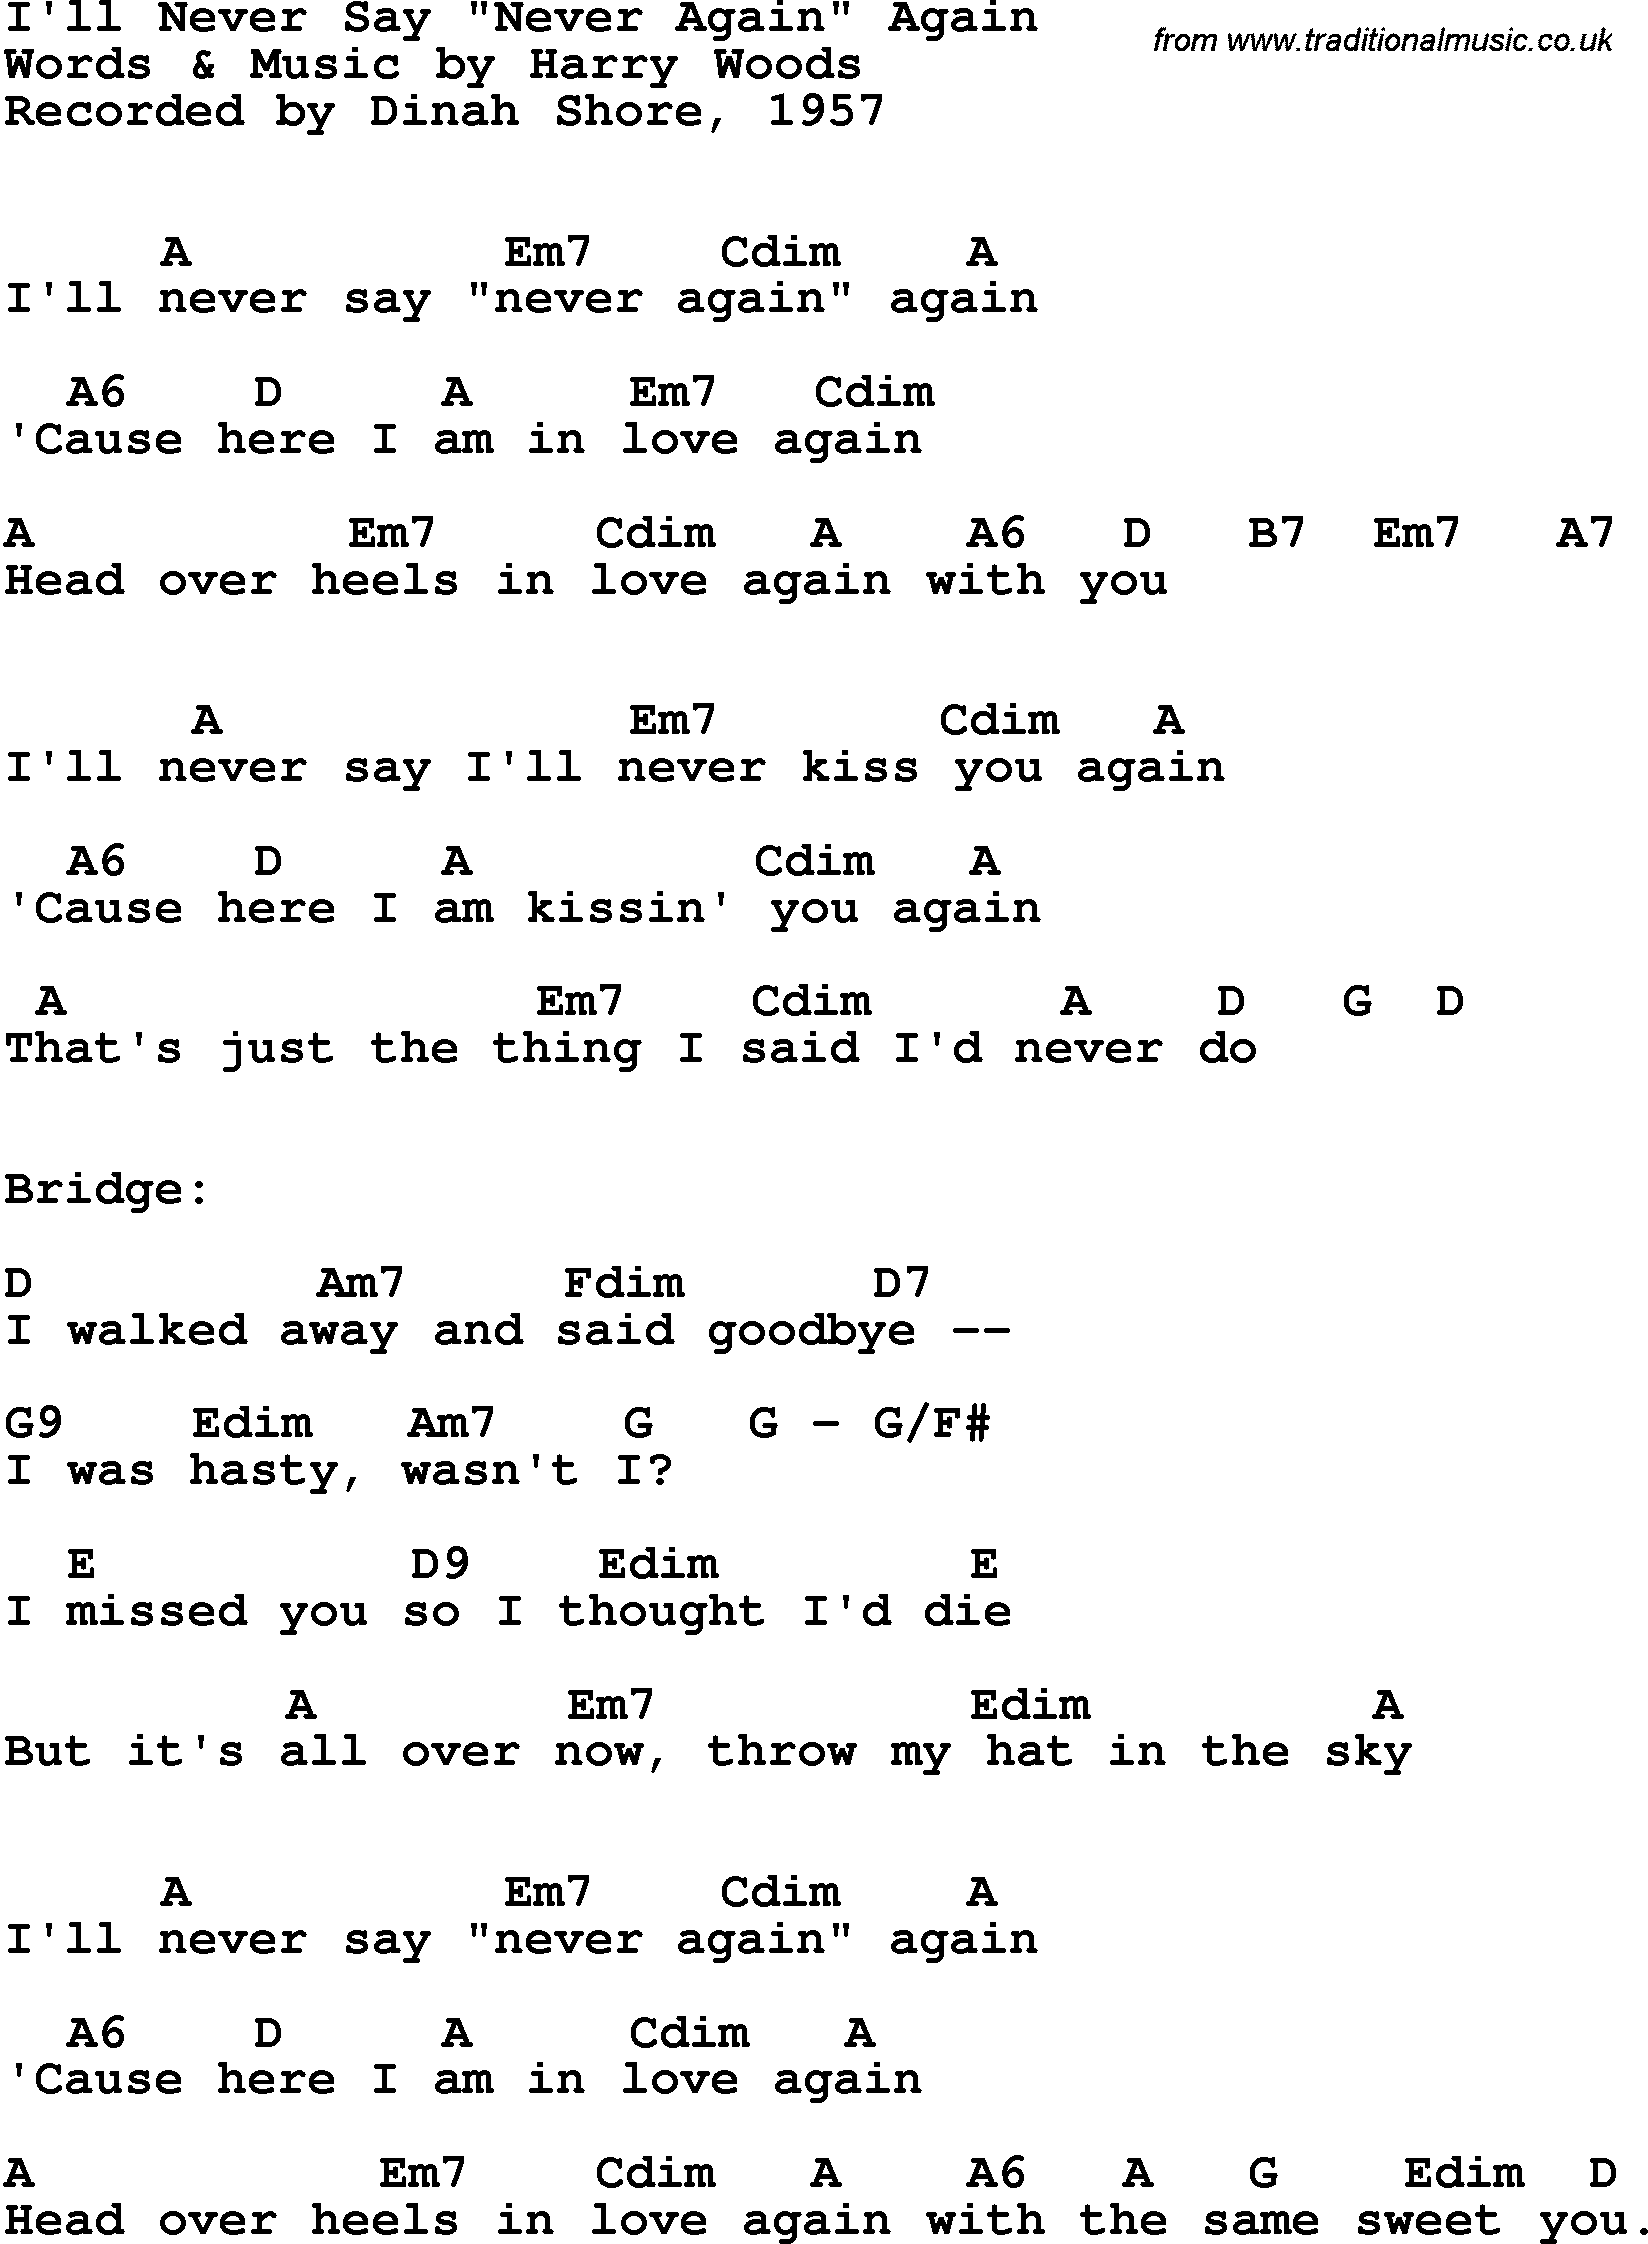 Song Lyrics with guitar chords for I'll Never Say Never Again Again - Dinah Shore, 1957